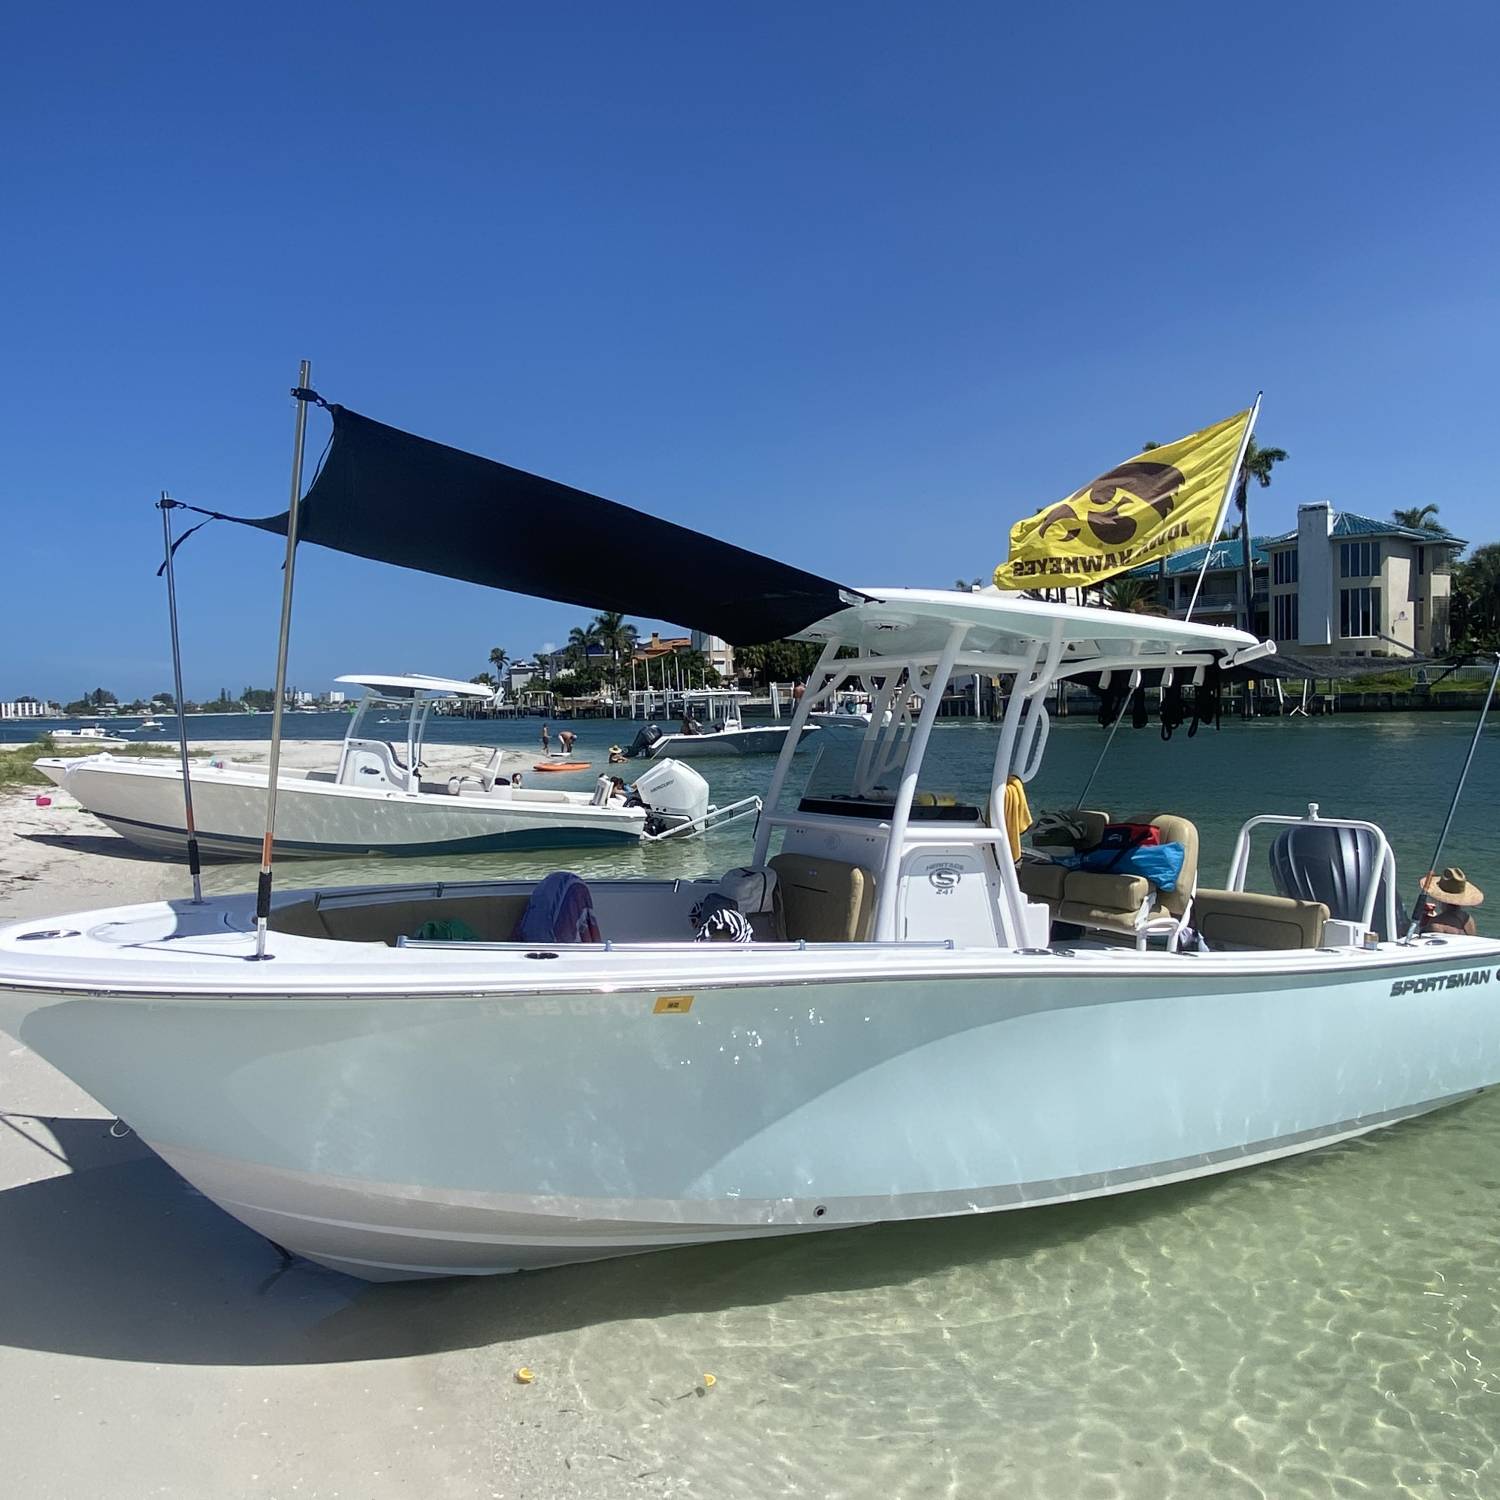 Title: Her first beach! - On board their Sportsman Heritage 241 Center Console - Location: Shell Key. Participating in the Photo Contest #SportsmanAugust